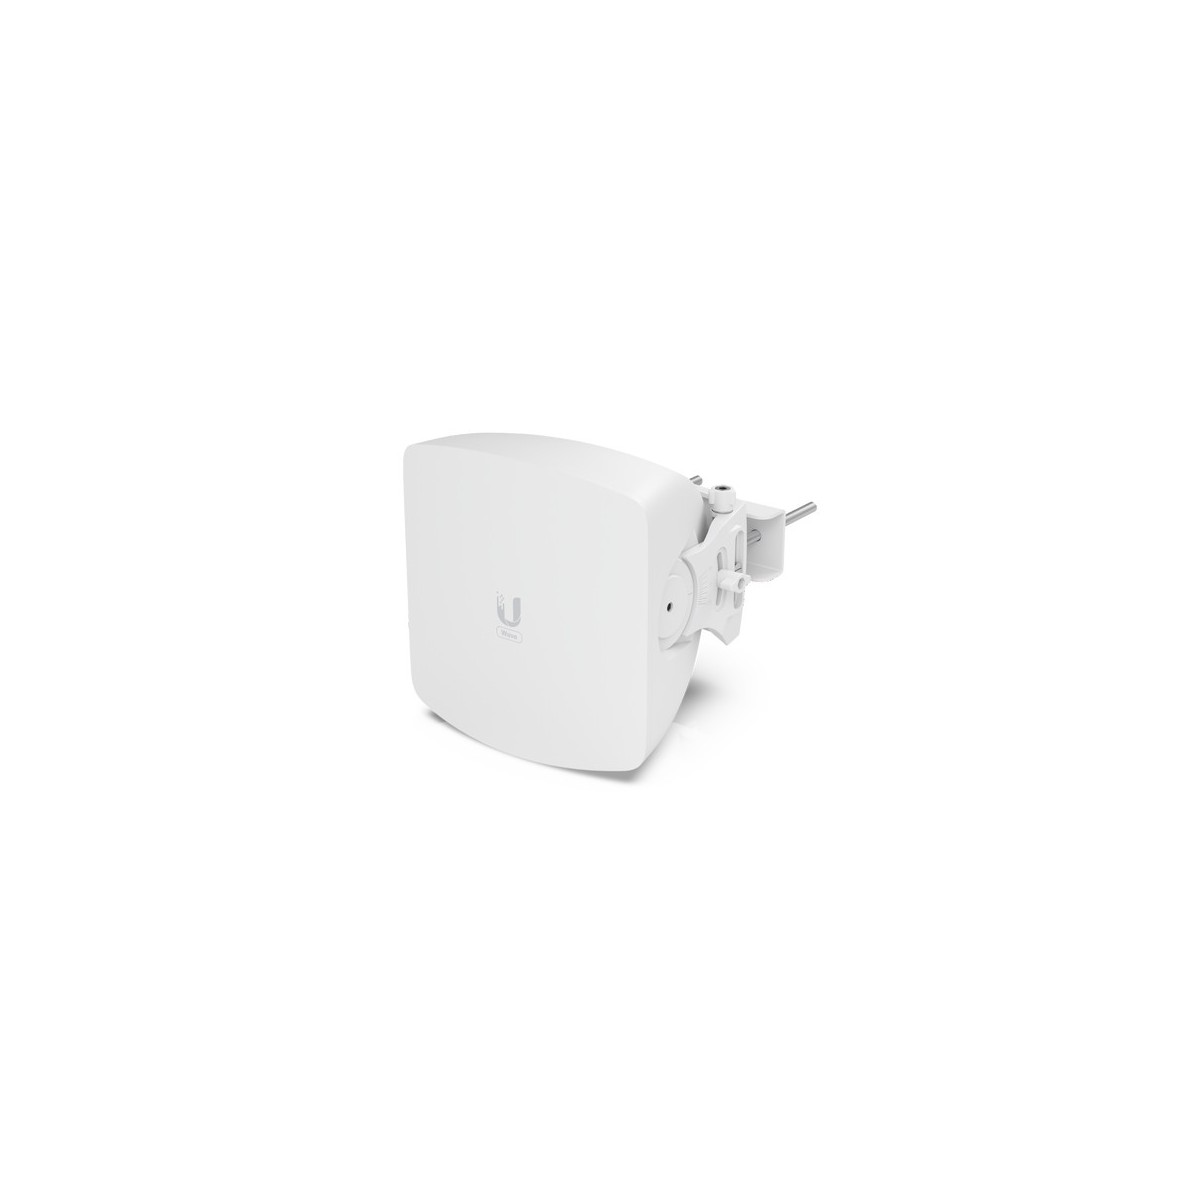 UbiQuiti UISP Wave 60 GHz Access Point powered by Technology - GPS Antenna